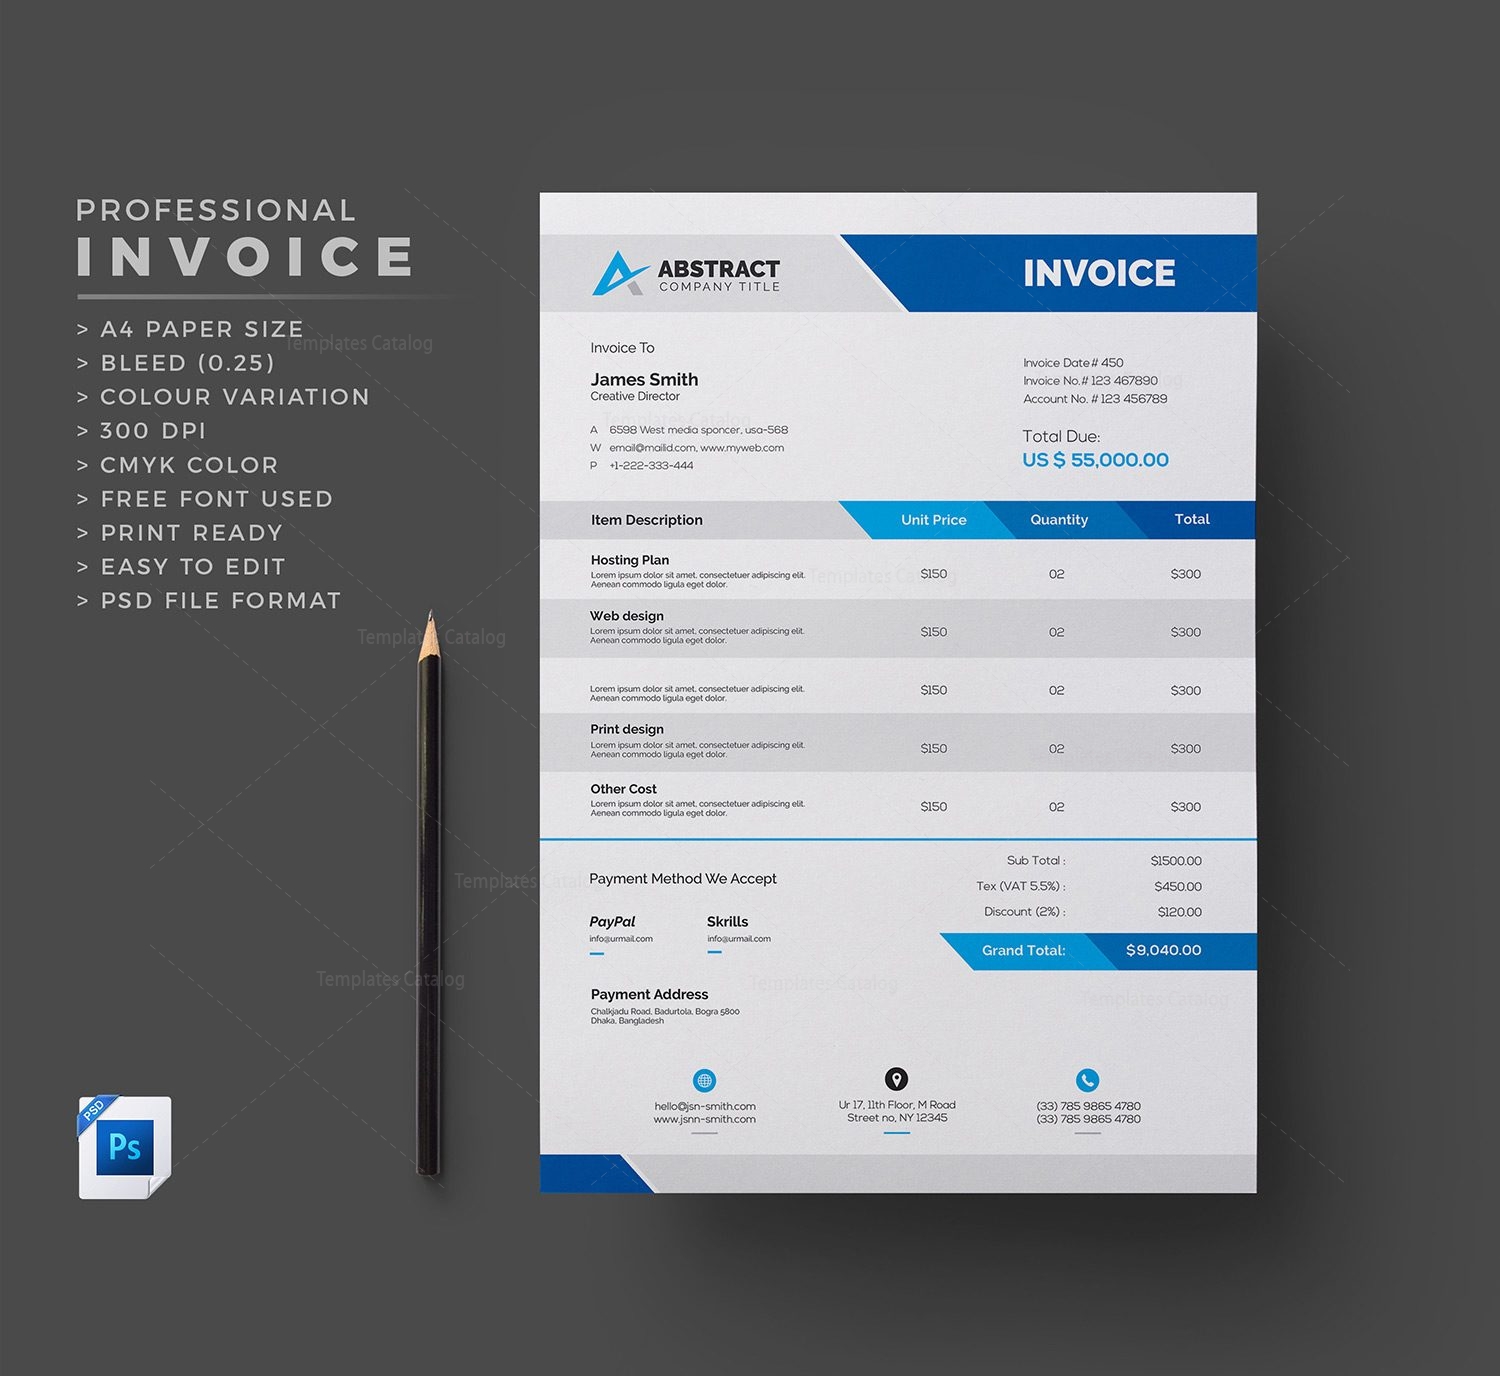 Invoice Template Psd Free